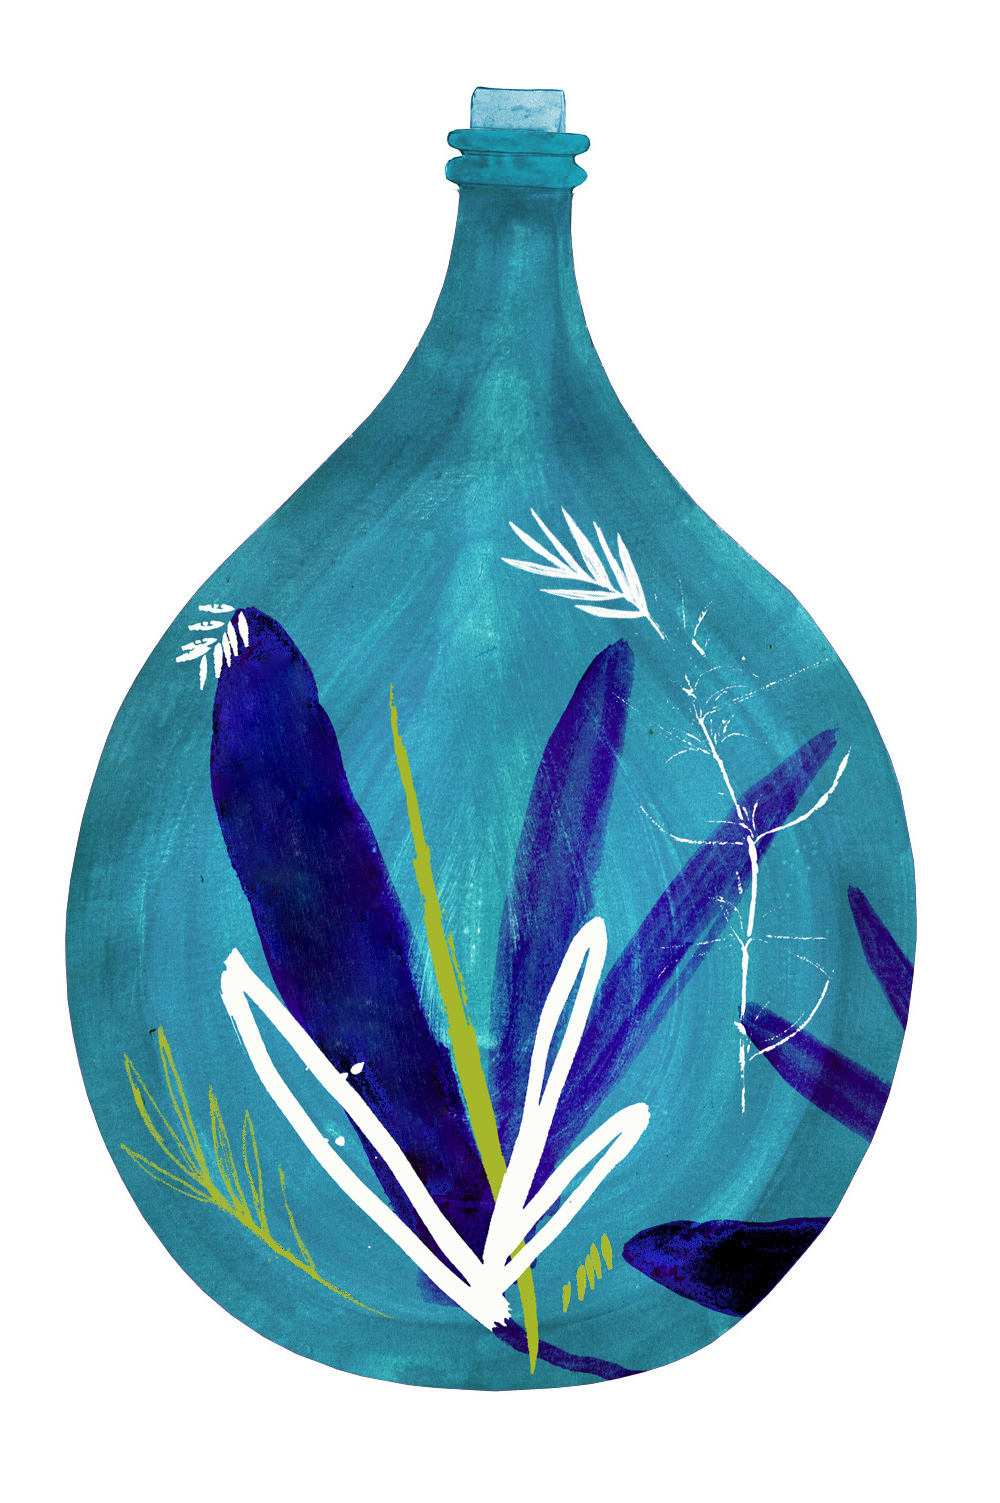 Made For life Organics Blue Demijohn hand painted illustration by Wild Bear Designs